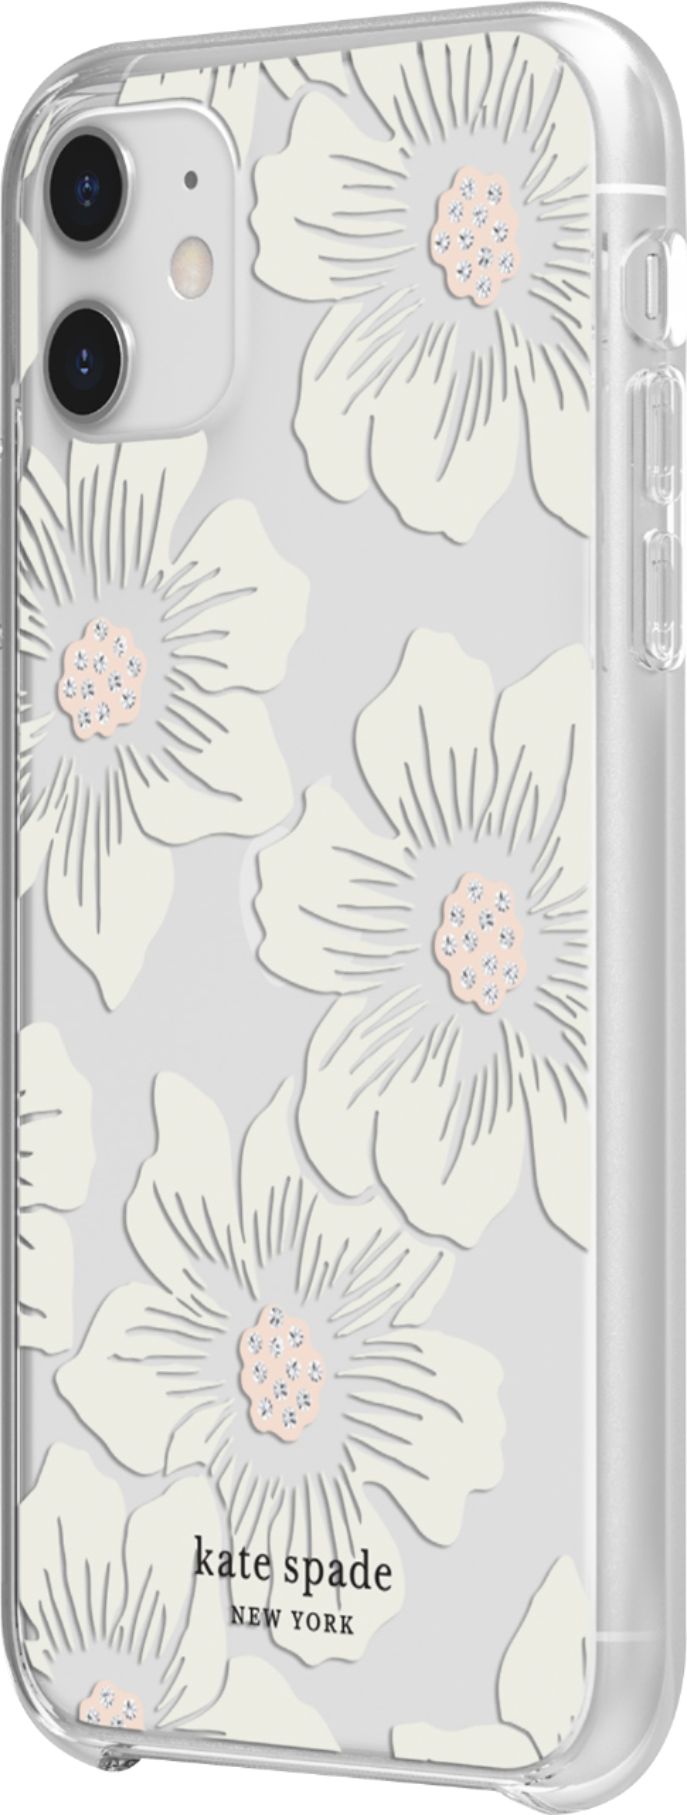 Left View: kate spade new york - Protective Hard Shell Case for Apple® iPhone® 11 - Cream With Stones/Hollyhock Floral Clear